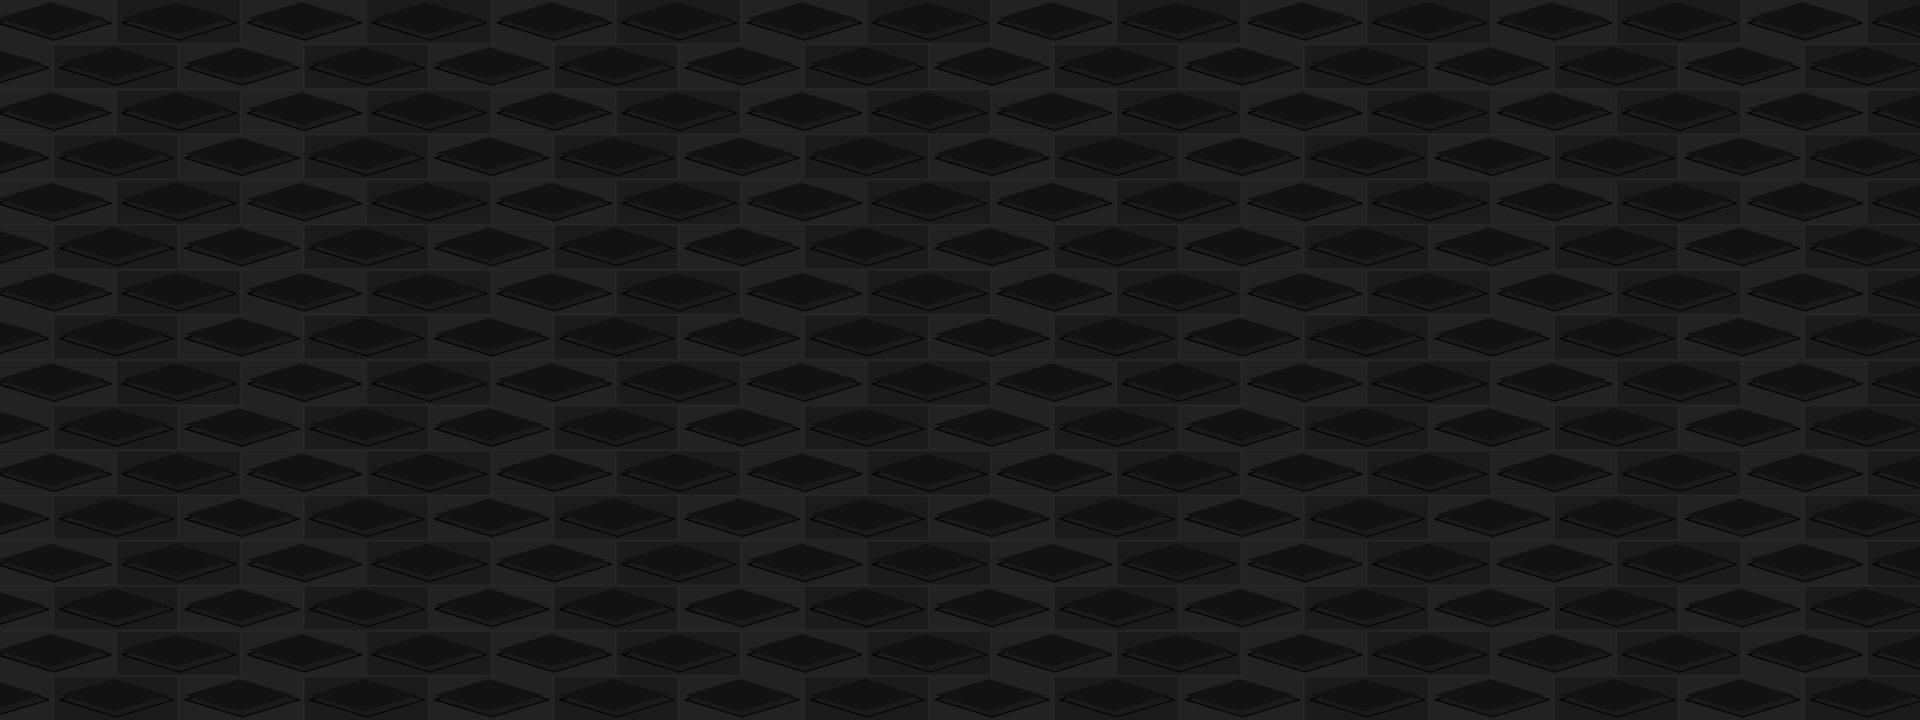 Abstract background texture pattern black surface backdrop vector illustration